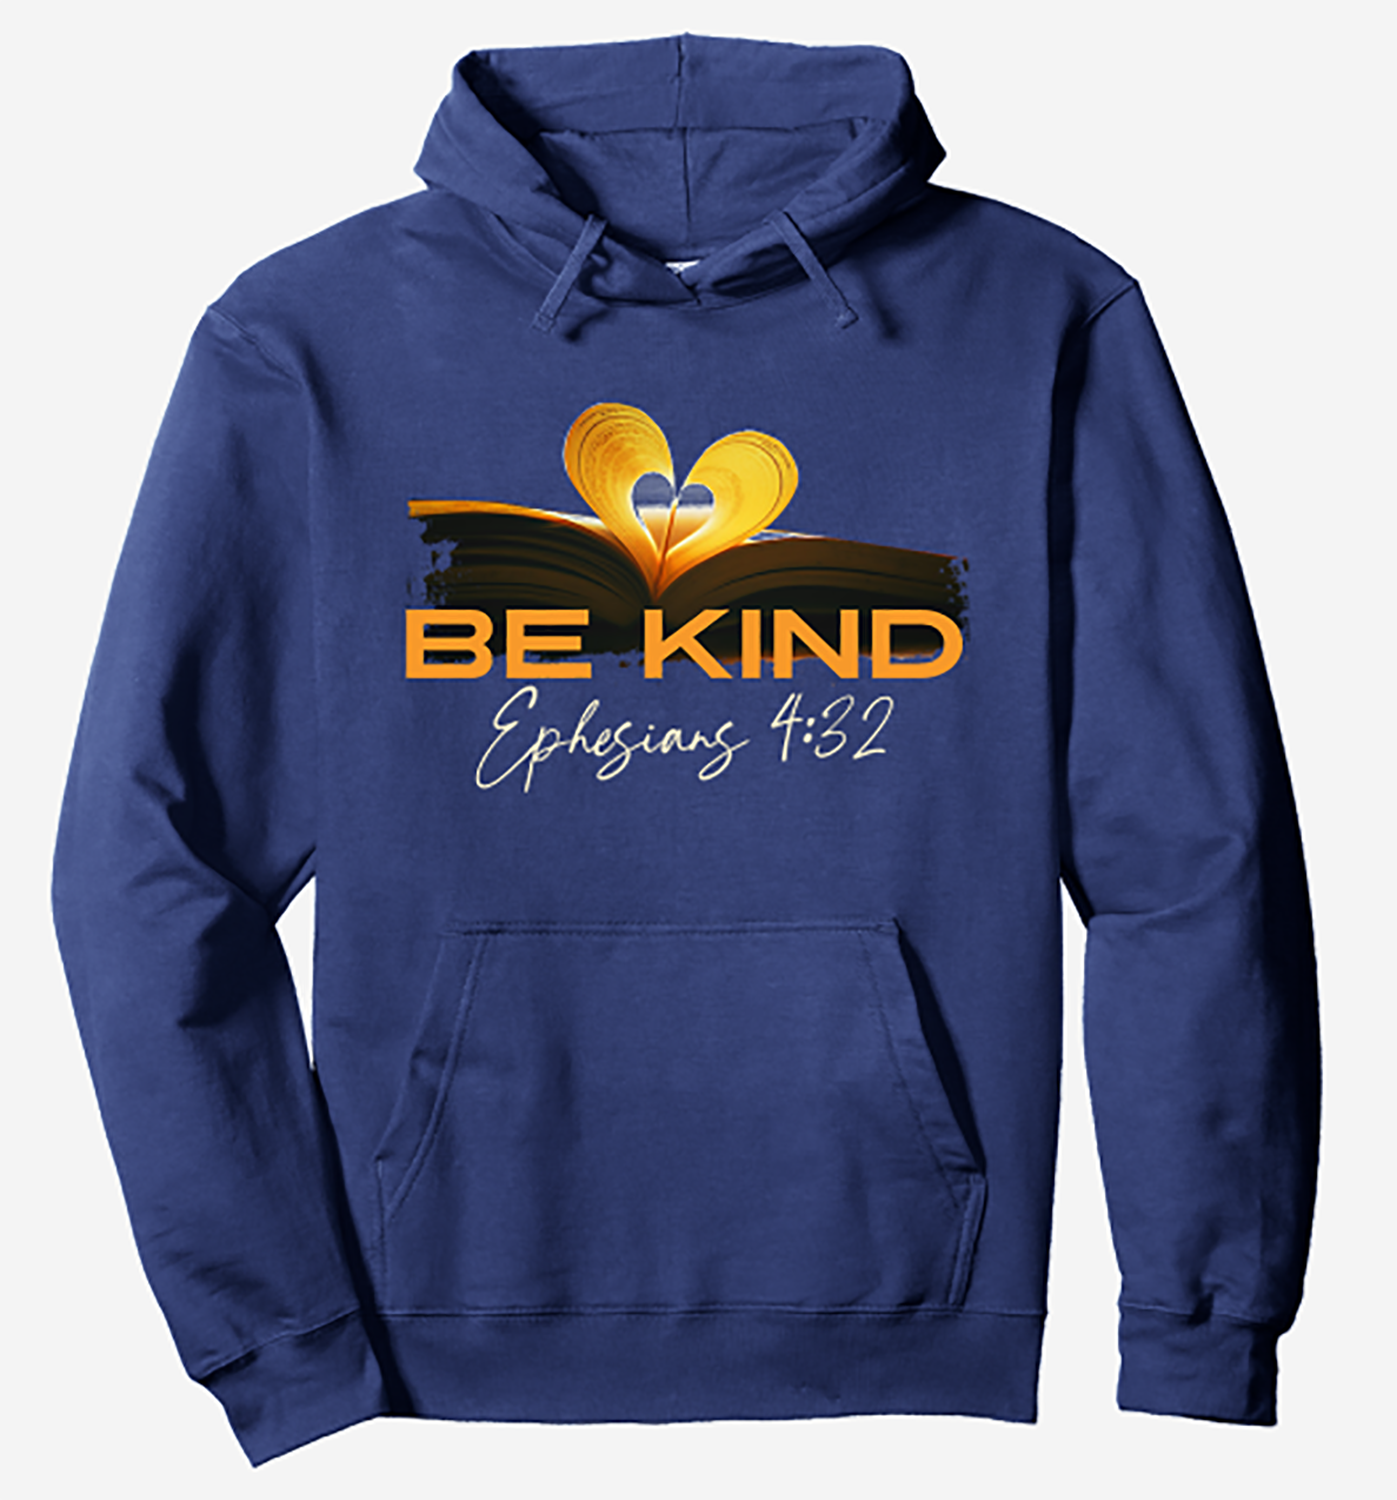 Be Kind - Pullover Hoodie - Fun and Inspirational Design by Crucial Key